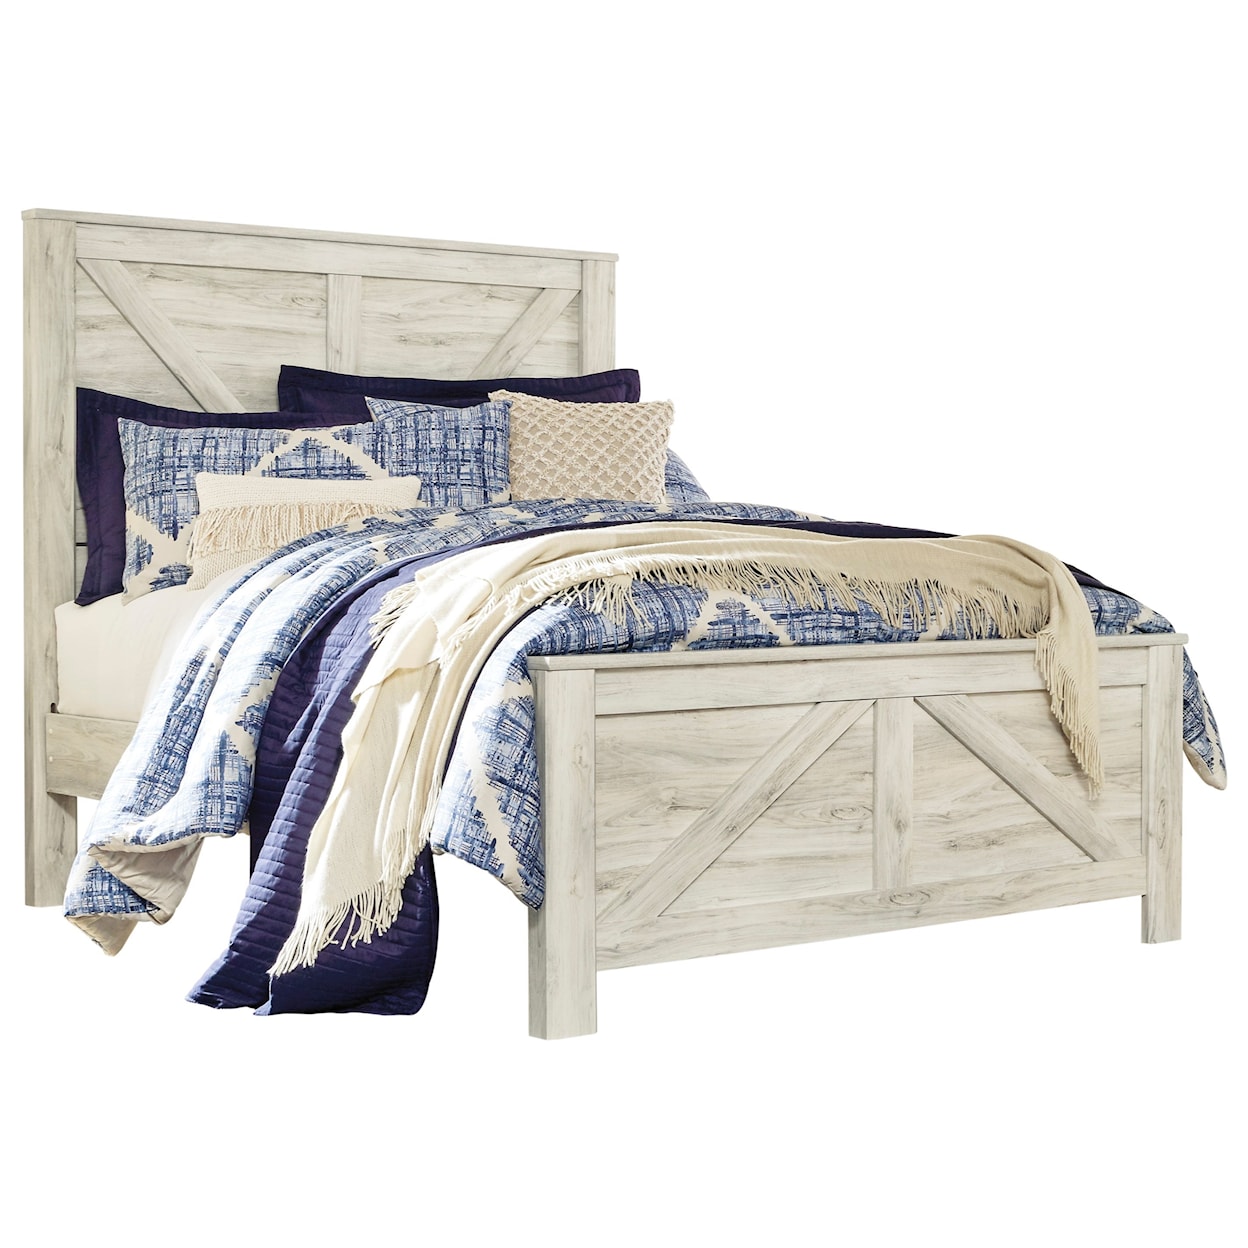 Signature Design by Ashley Bellaby Queen Panel Bed